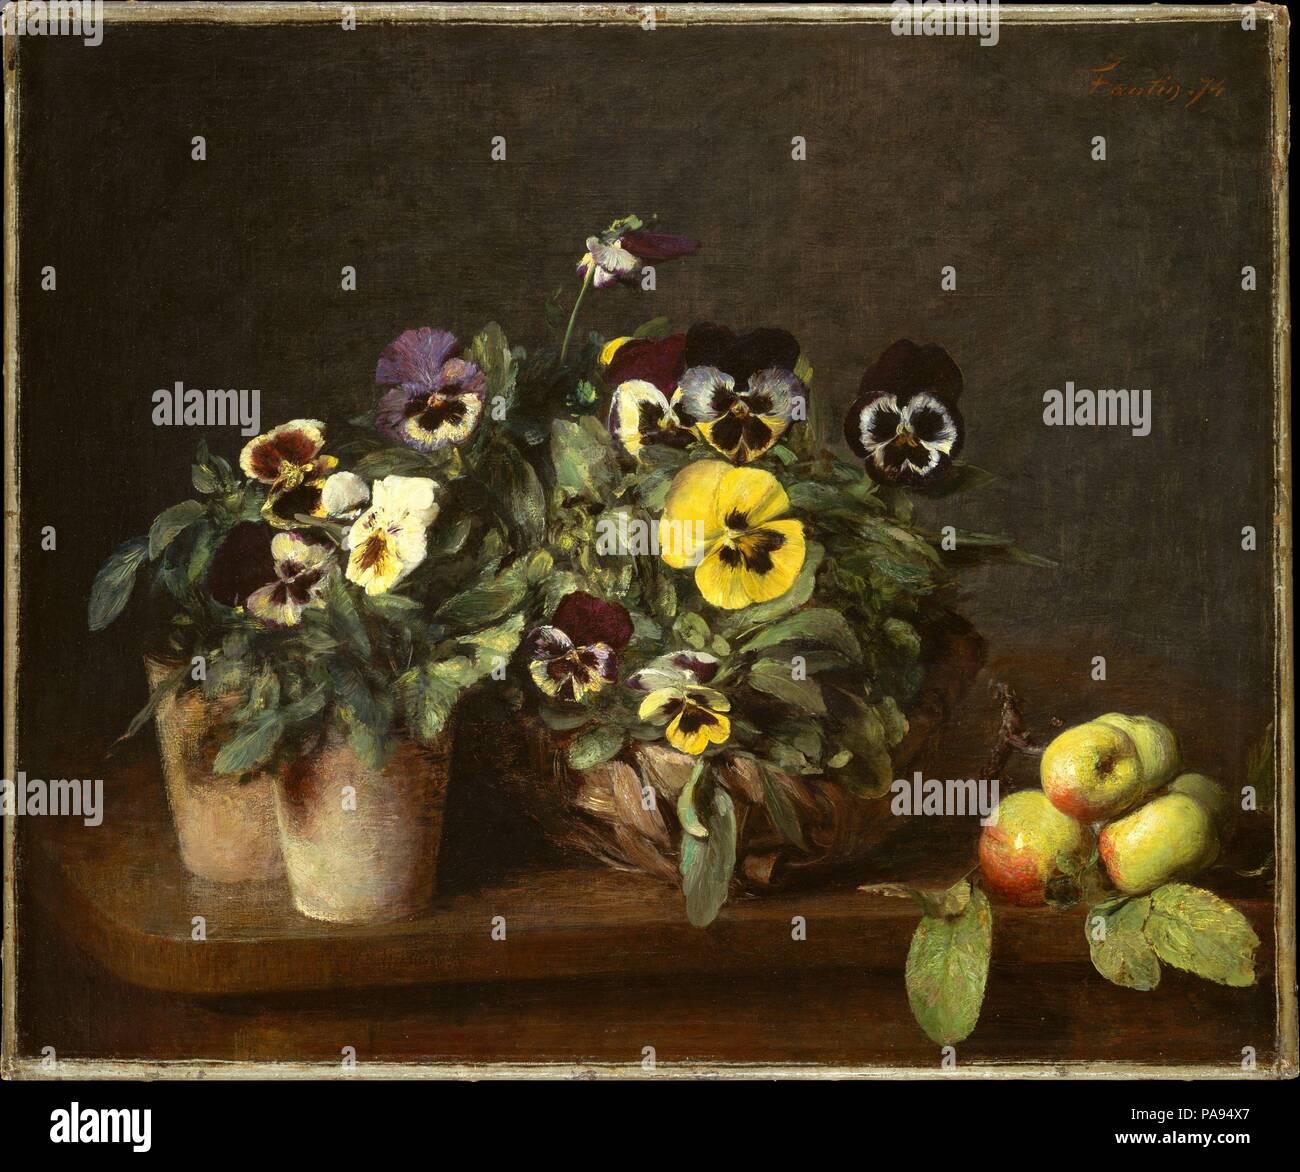 Still Life with Pansies. Artist: Henri Fantin-Latour (French, Grenoble 1836-1904 Buré). Dimensions: 18 1/2 x 22 1/4 in. (47 x 56.5 cm). Date: 1874.  According to a list of Fantin's paintings compiled by his wife, this still life is one of thirty-one compositions of flowers and fruit that the artist produced in 1874. The branch of apples suggests that the present picture was painted in the fall; the pansies are spring flowers that were probably cultivated in a hothouse. Fantin reprised elements seen here in at least two other paintings: <i>Potted Pansies</i> of 1883 (2013.636) and <i>Pansies</i Stock Photo